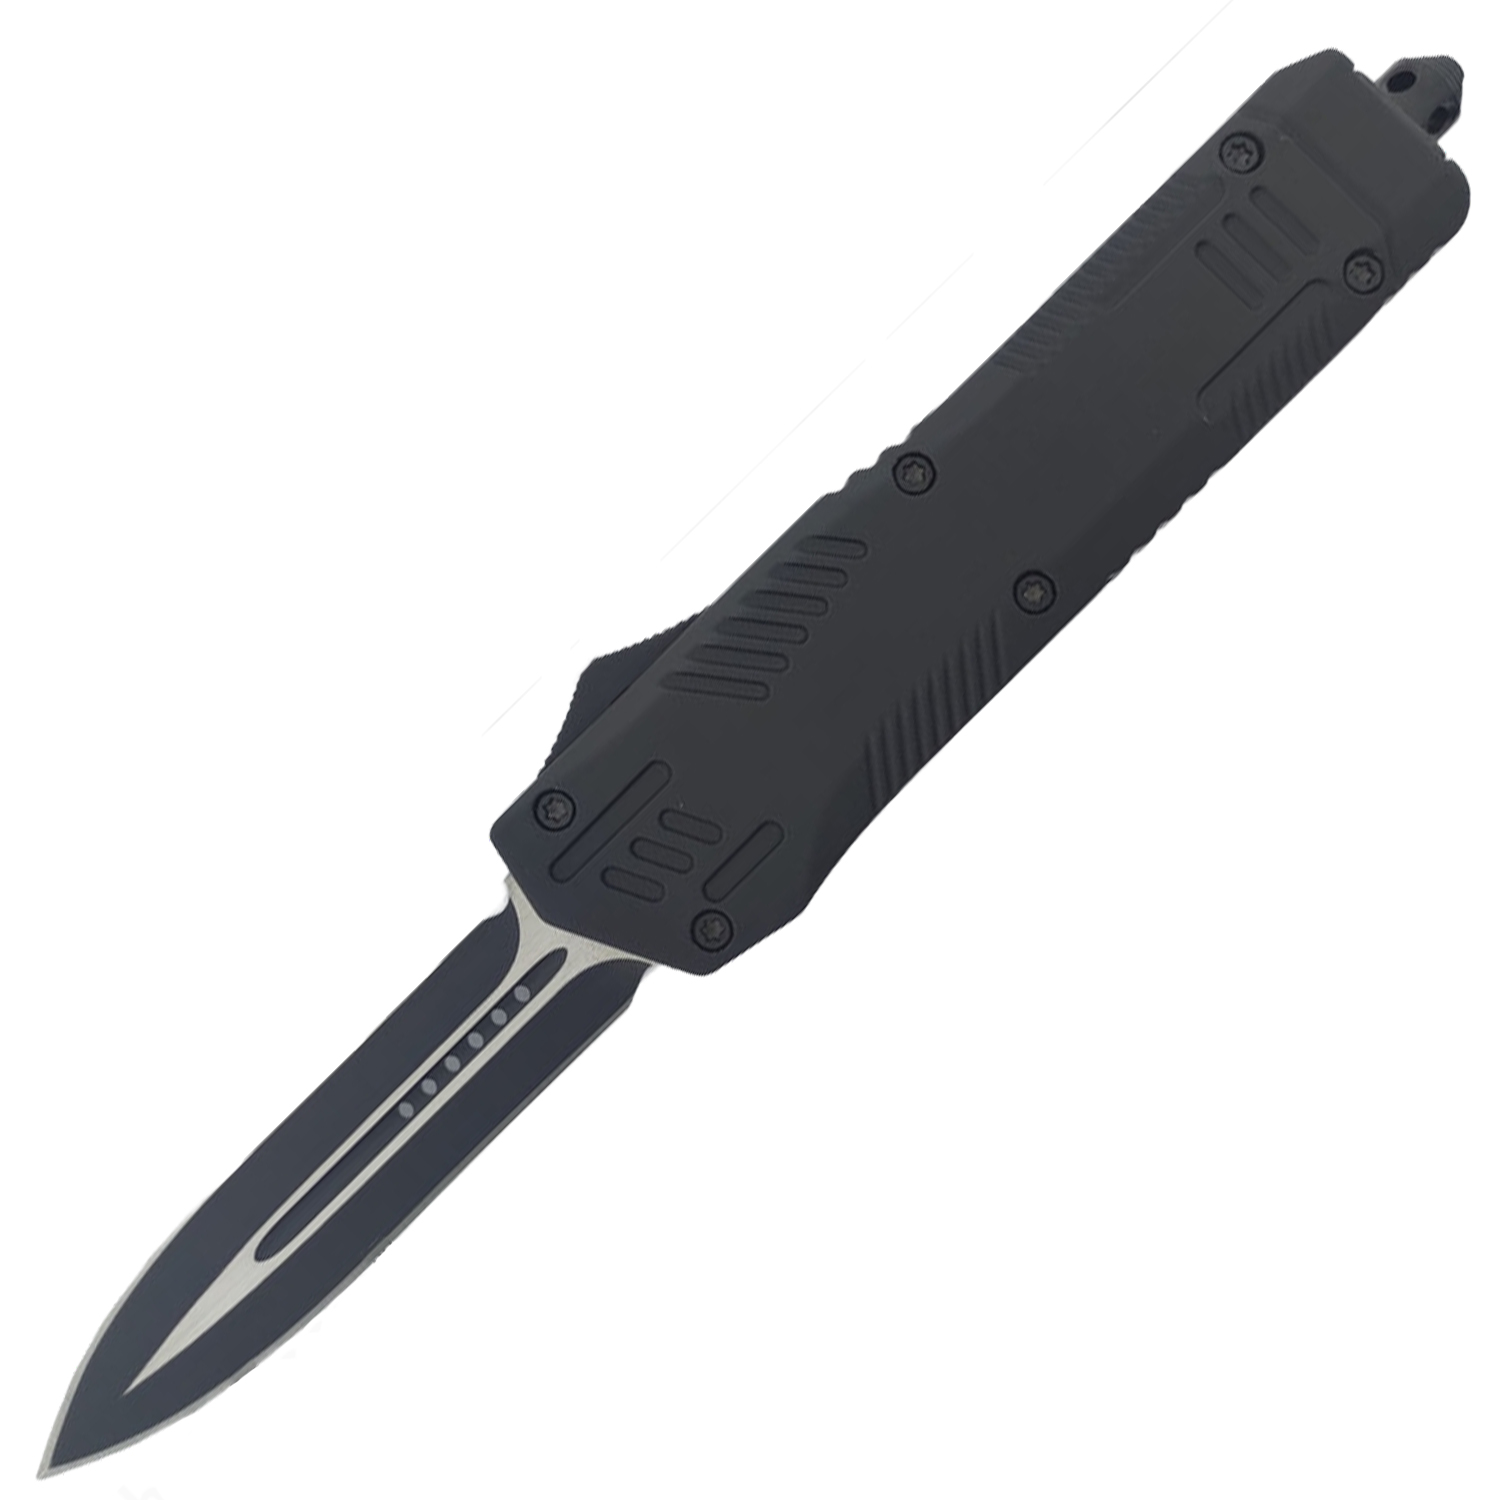 Covert OPS USA OTF Automatic Knife 9 inch Black D2 Steel Blade DEdge